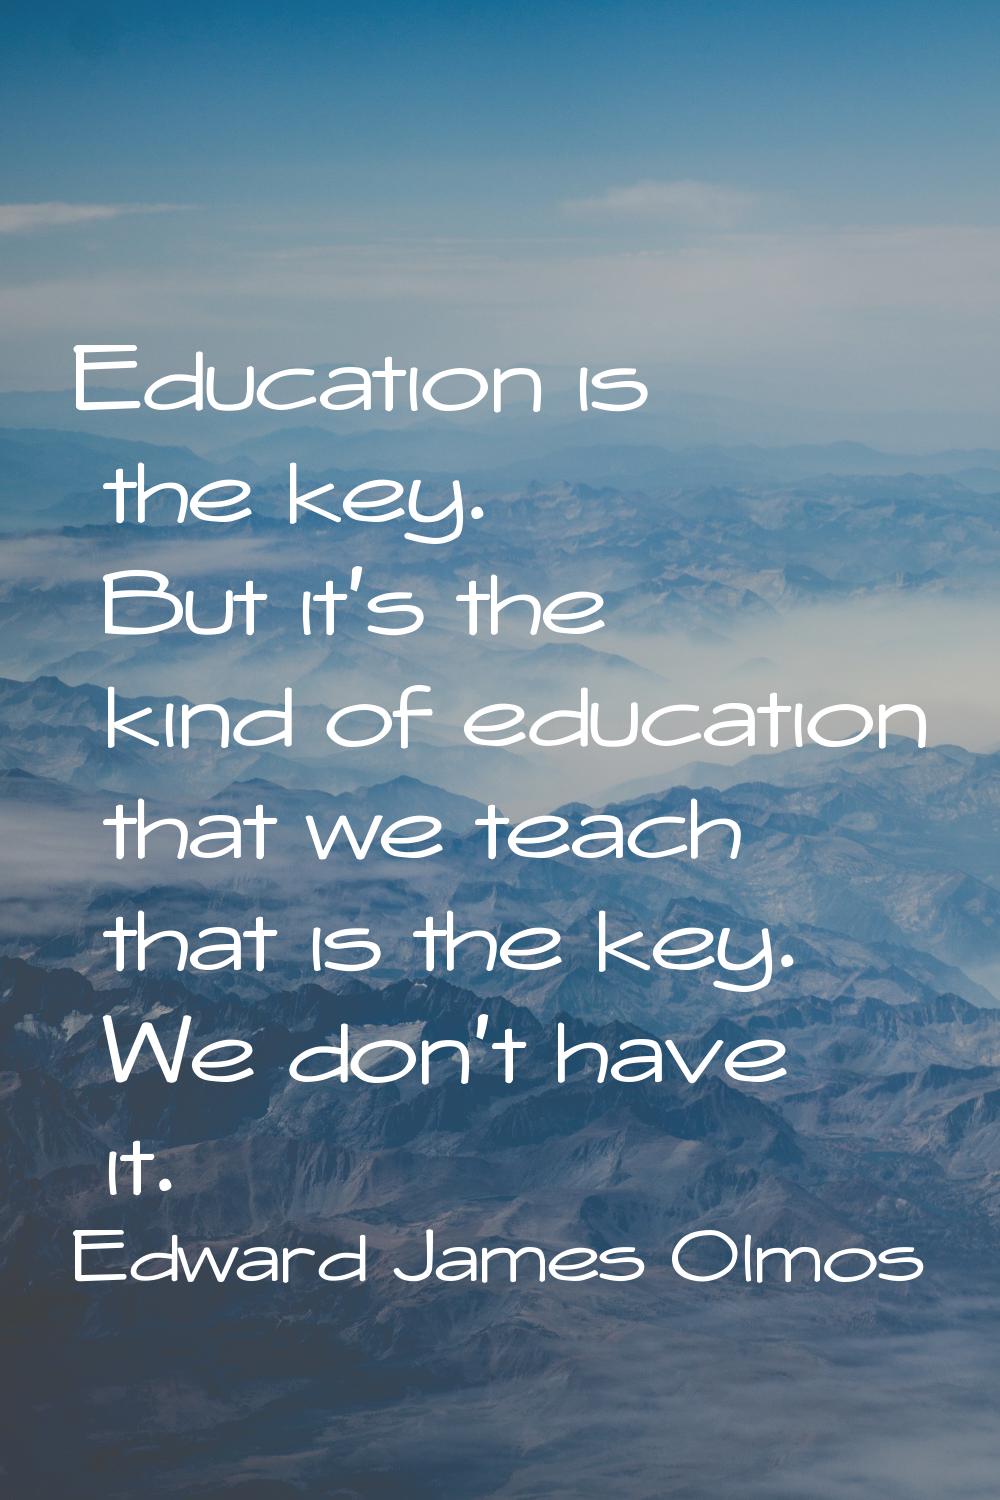 Education is the key. But it's the kind of education that we teach that is the key. We don't have i